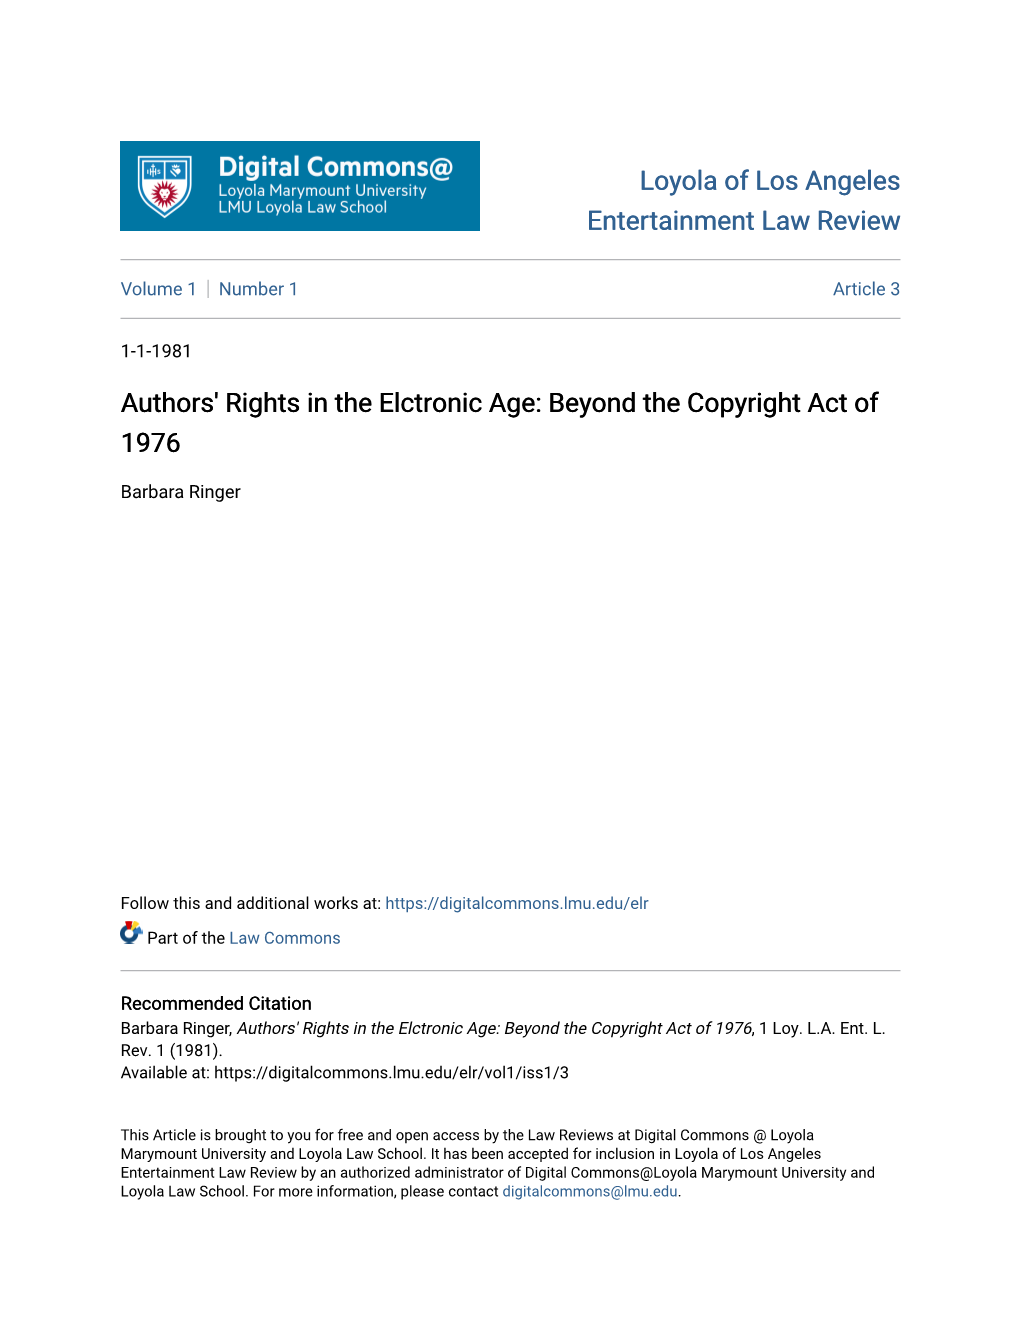 Authors' Rights in the Elctronic Age: Beyond the Copyright Act of 1976